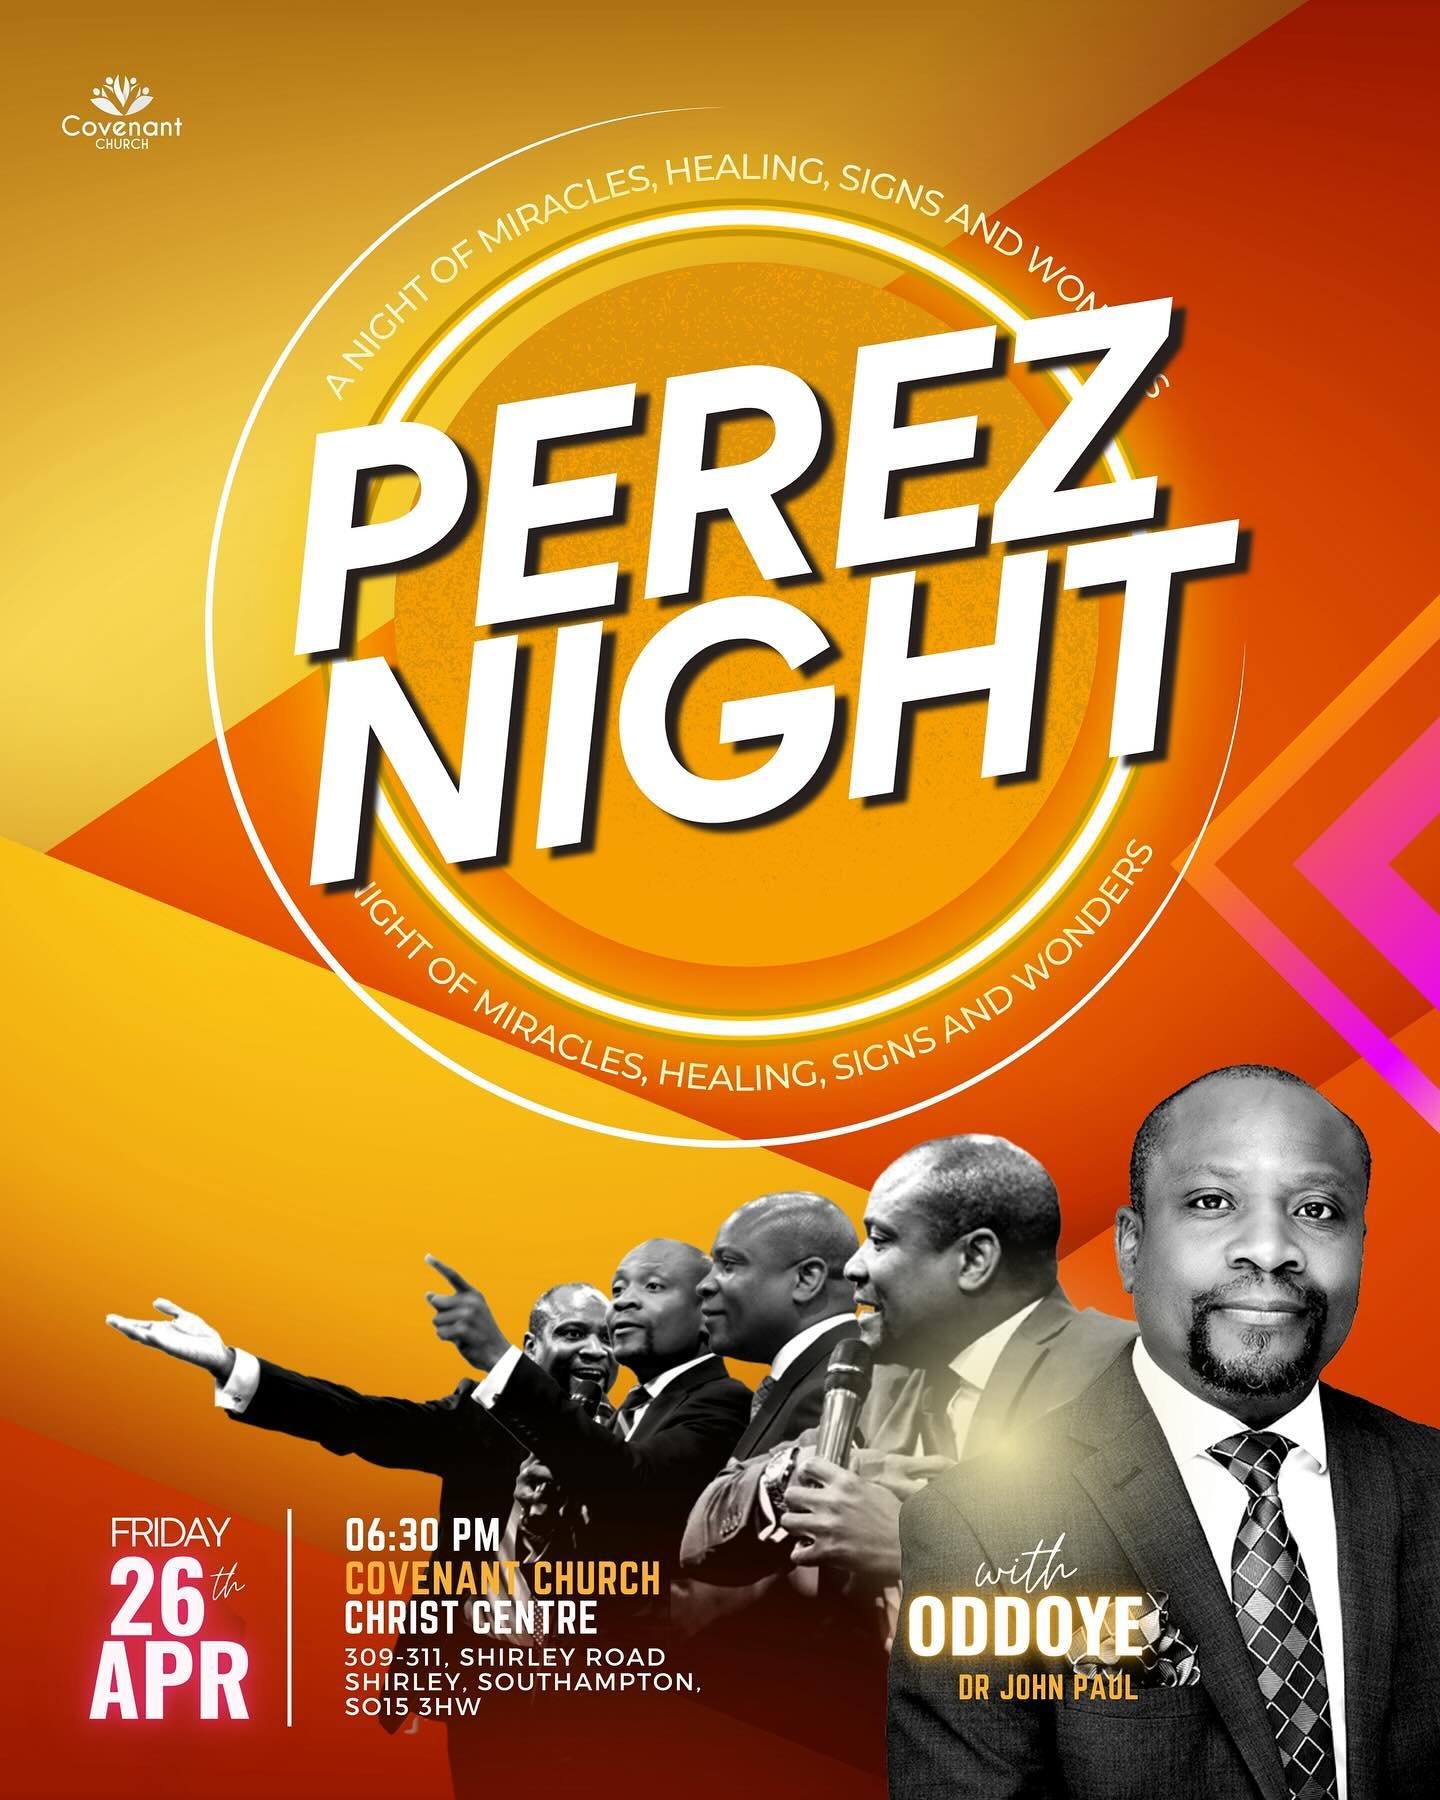 This Friday, 6:30pm is Perez Night! Make it down to Christ Centre for a powerful time of divine impartation. You don&rsquo;t want to miss this! 🔥 
.
#perez #night #miracles #signs #wonders #church #uk #southampton #power #strength #healing